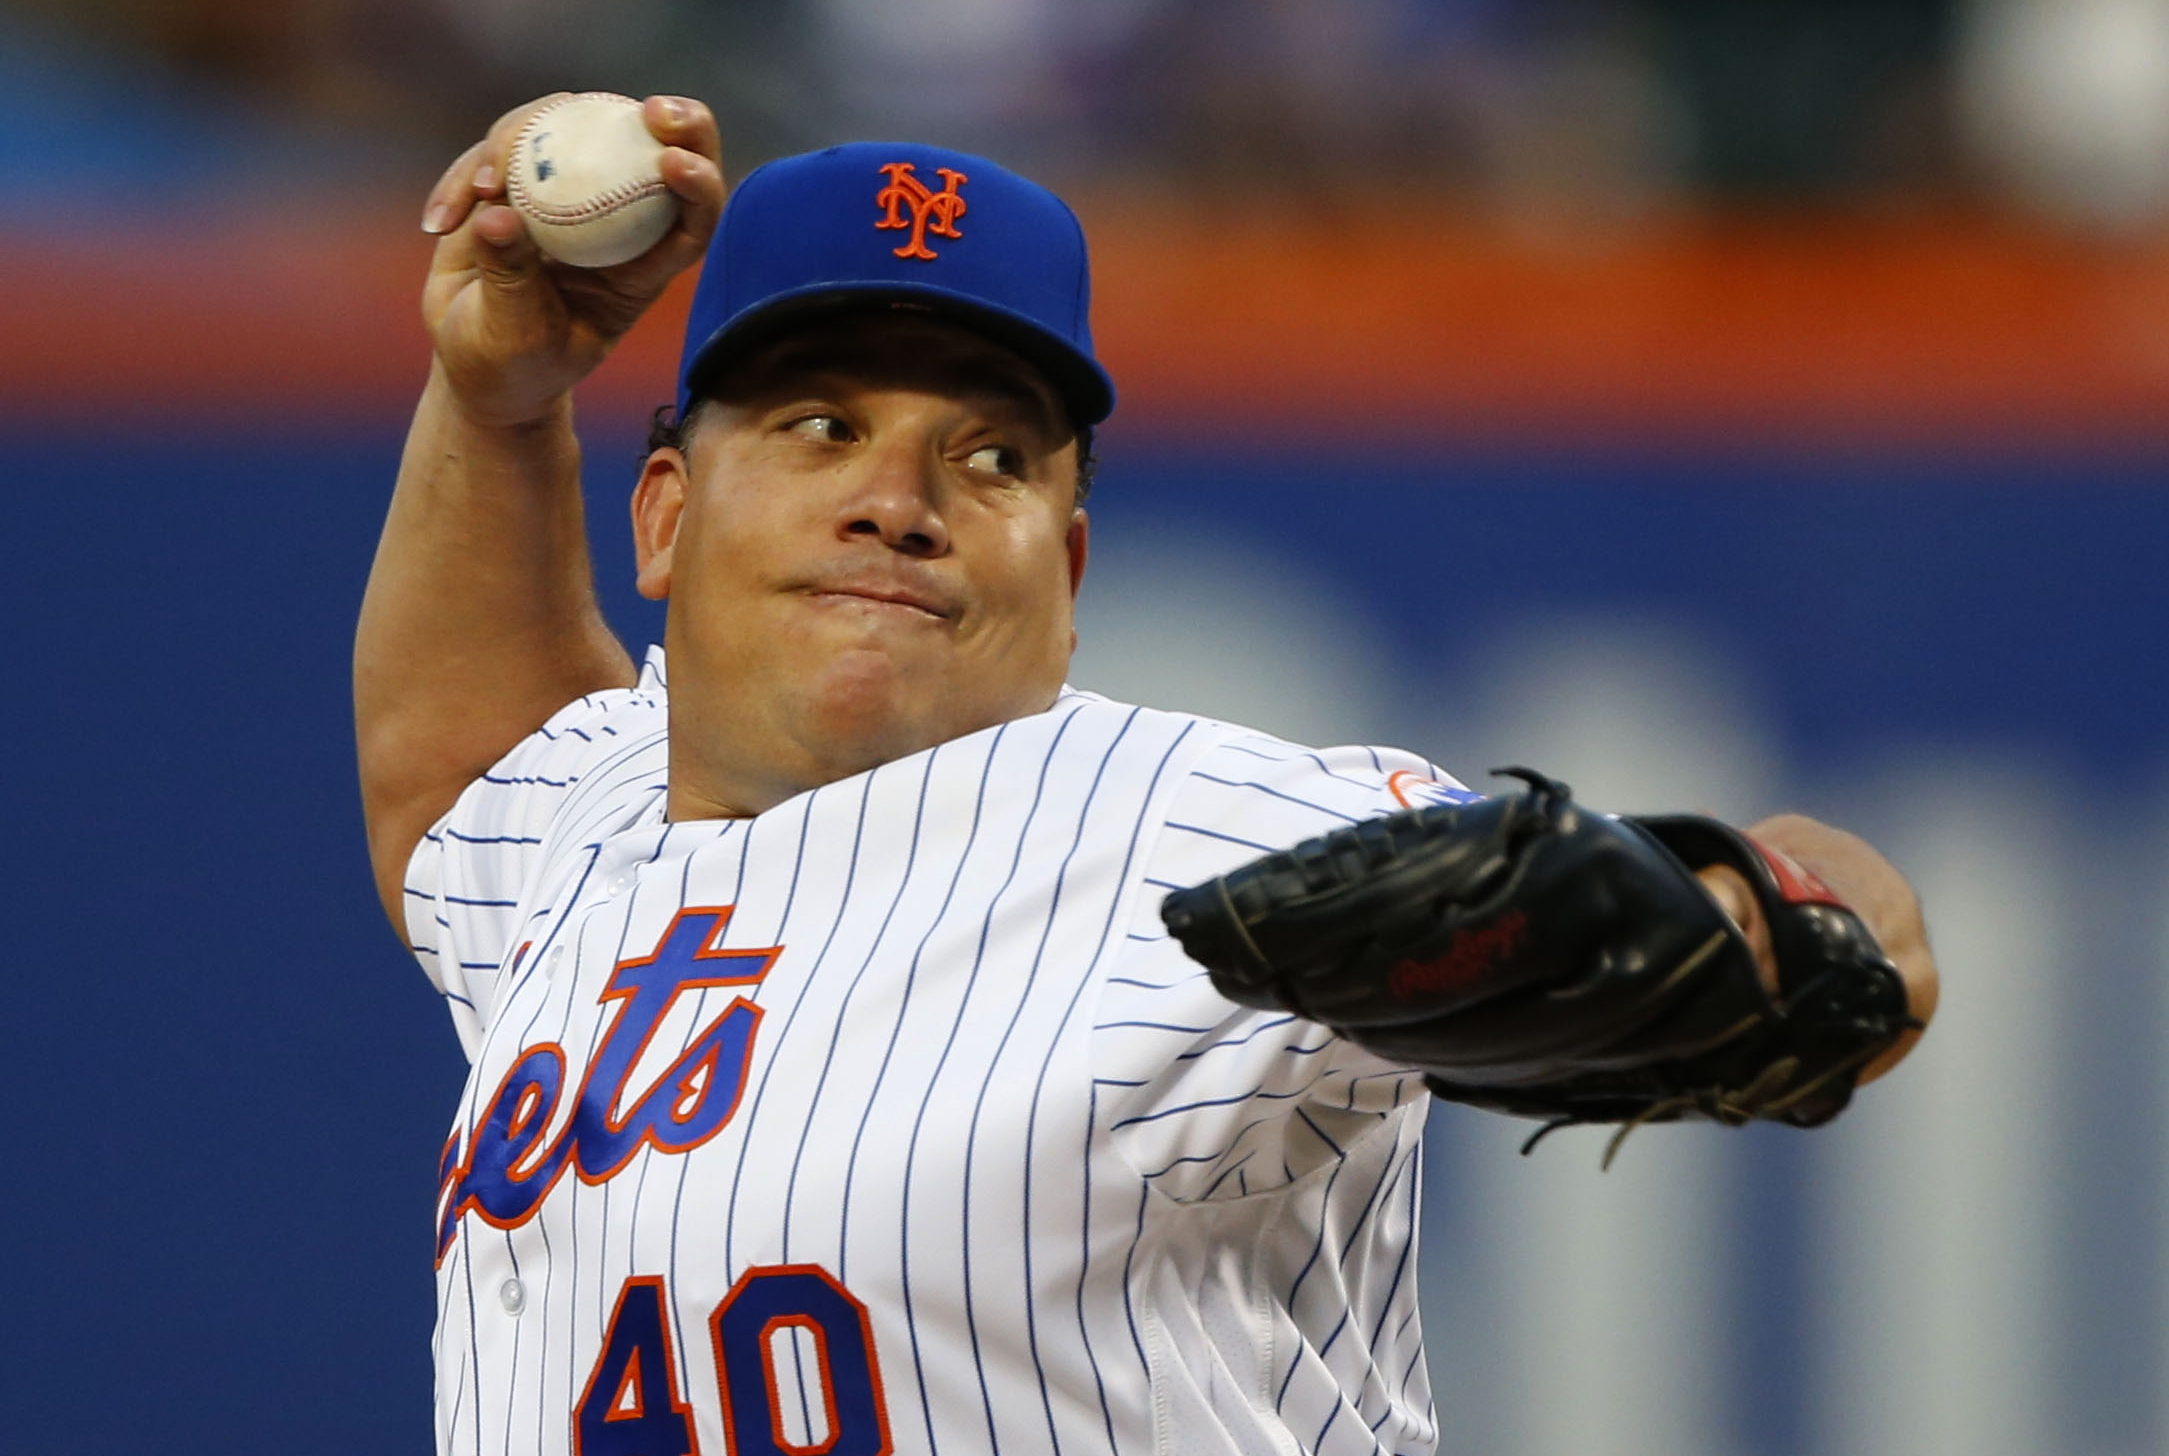 New York Mets' Jose Reyes Can't Help But FaceTime Bartolo Colon (Photo) 2